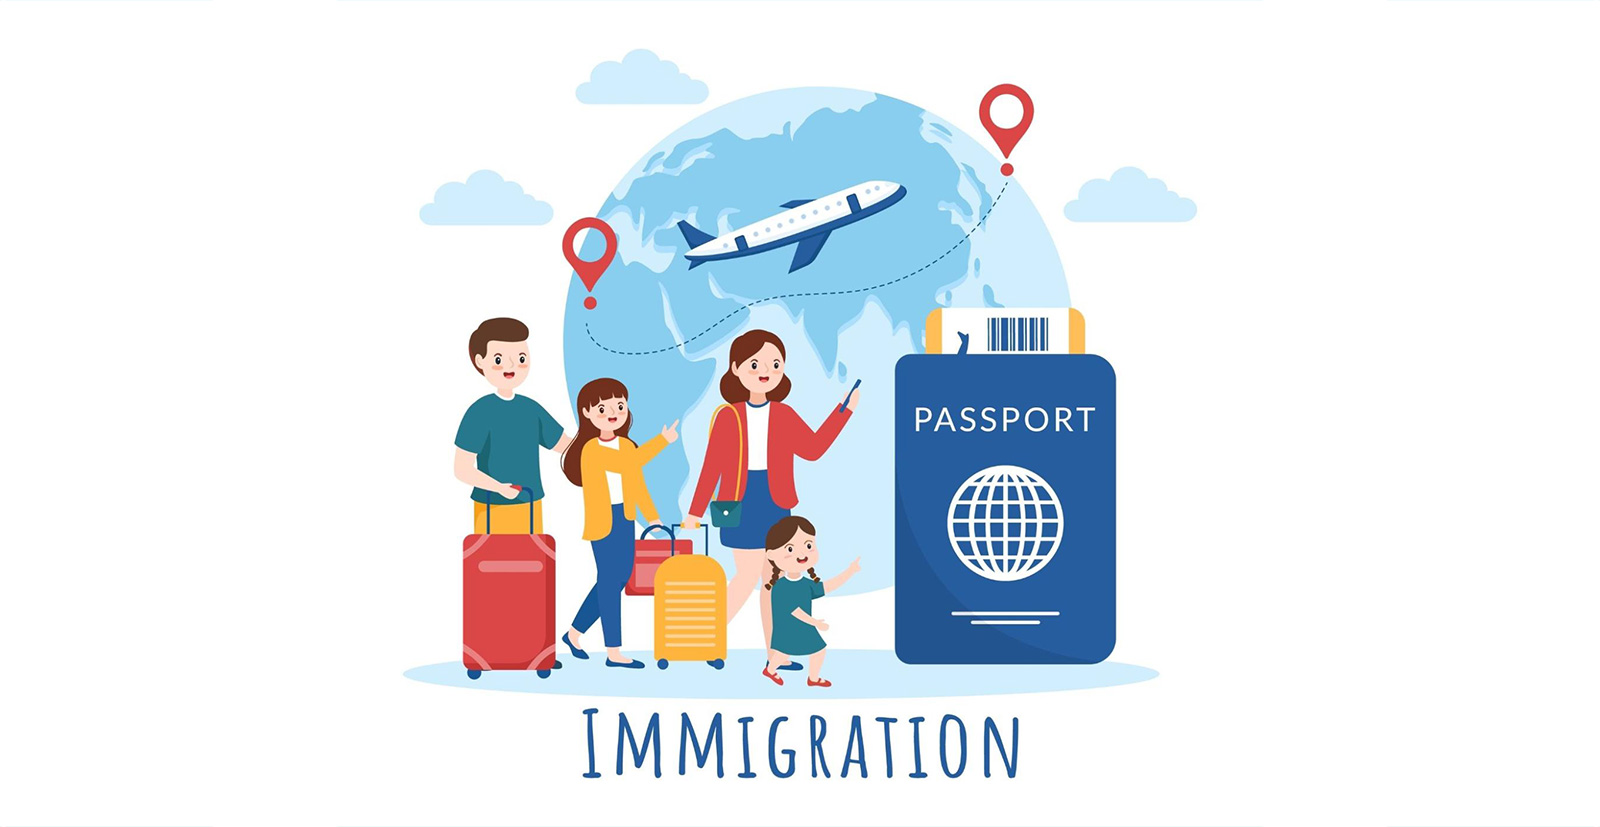 illustration of a family traveling for immigration with a passport, word map and a plane